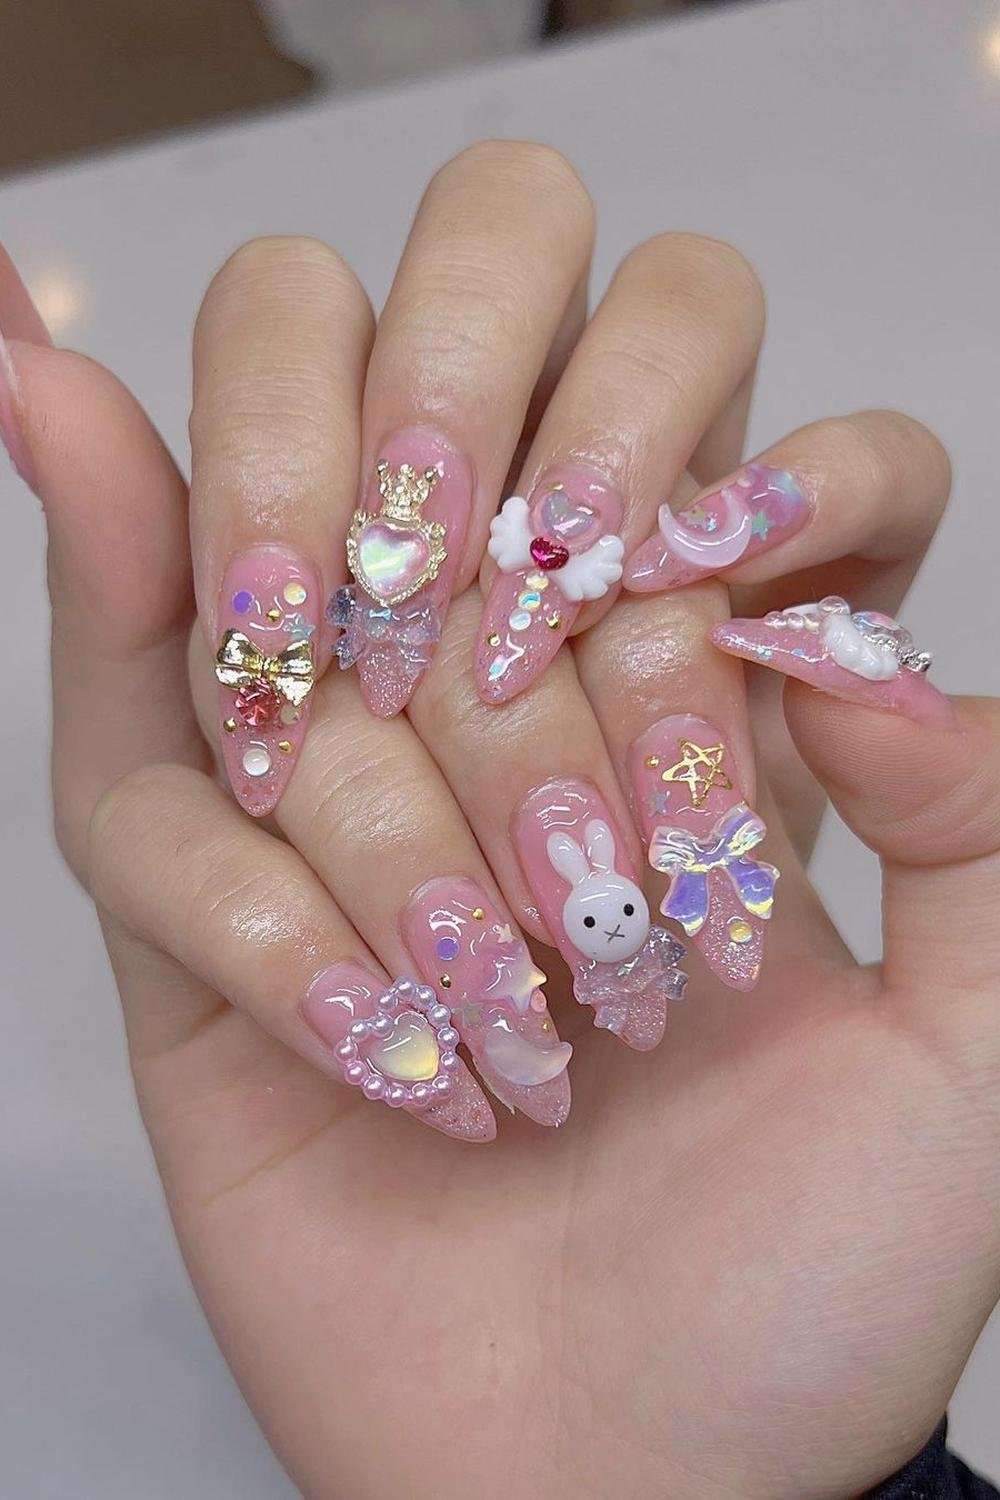 9 - Picture of Whimsical Nails